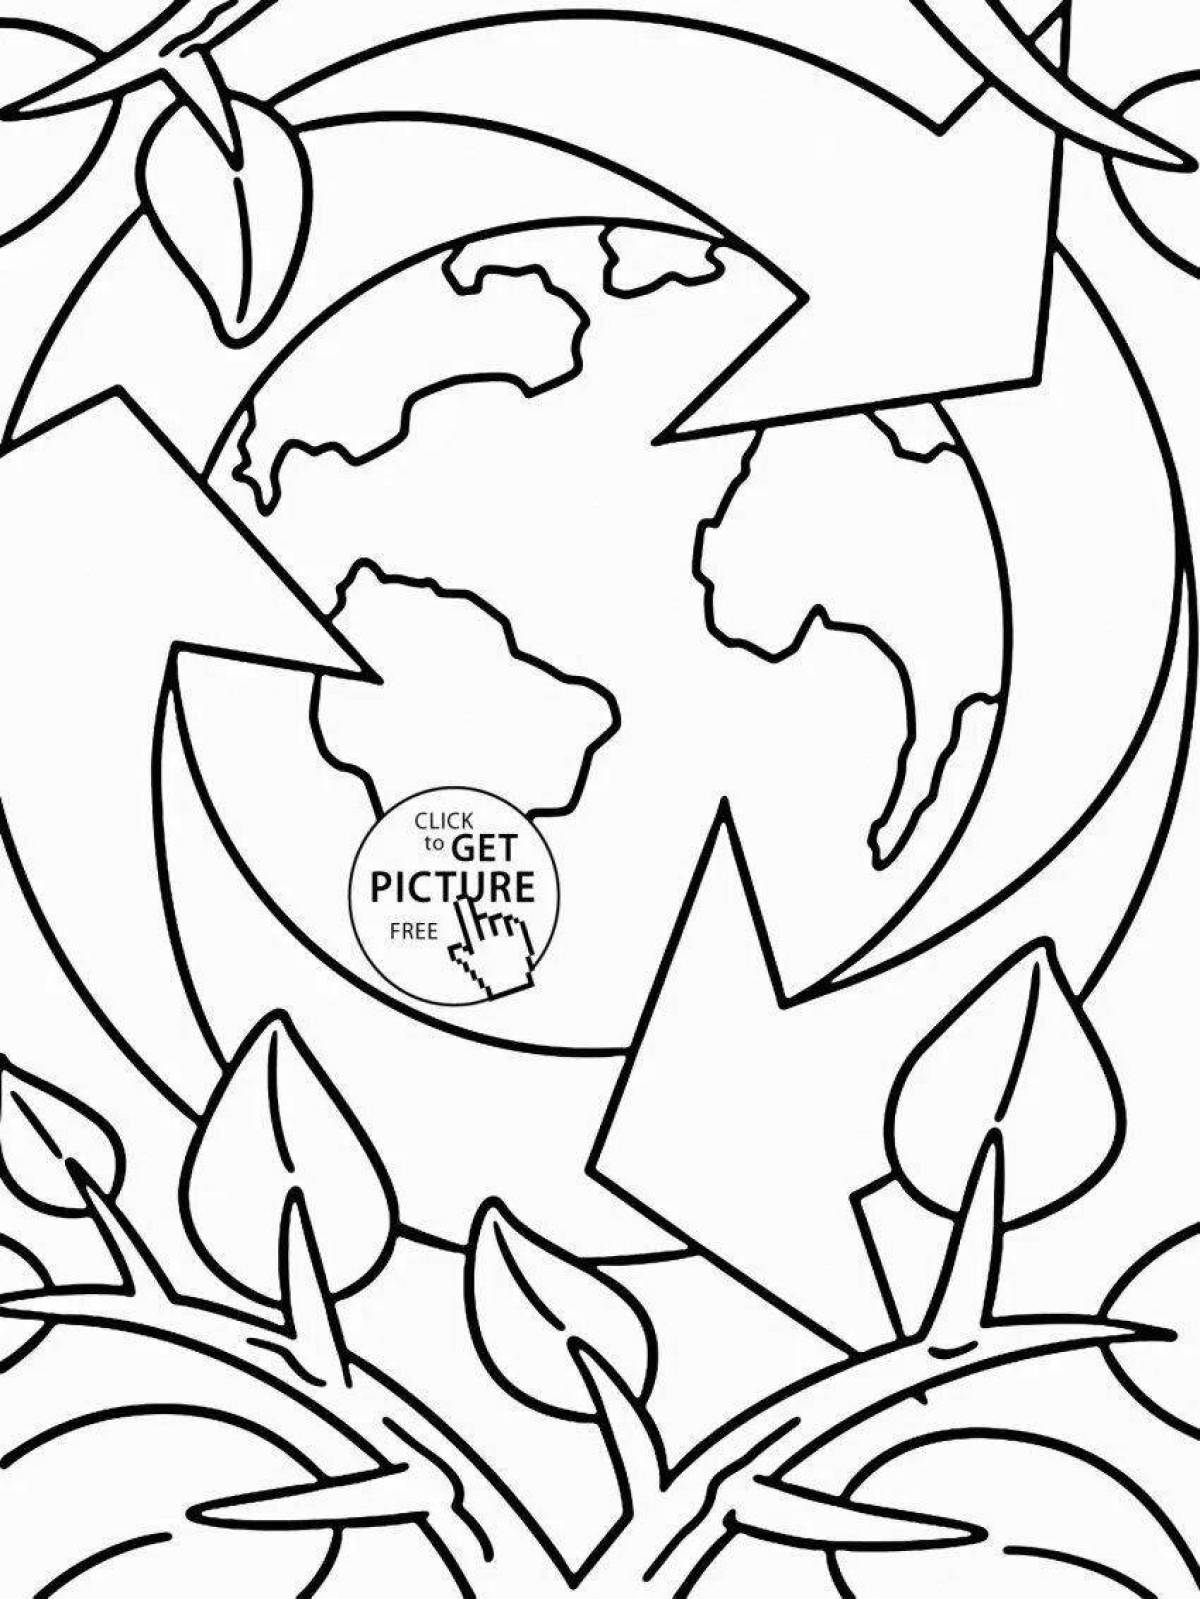 Innovative eco coloring book for kids